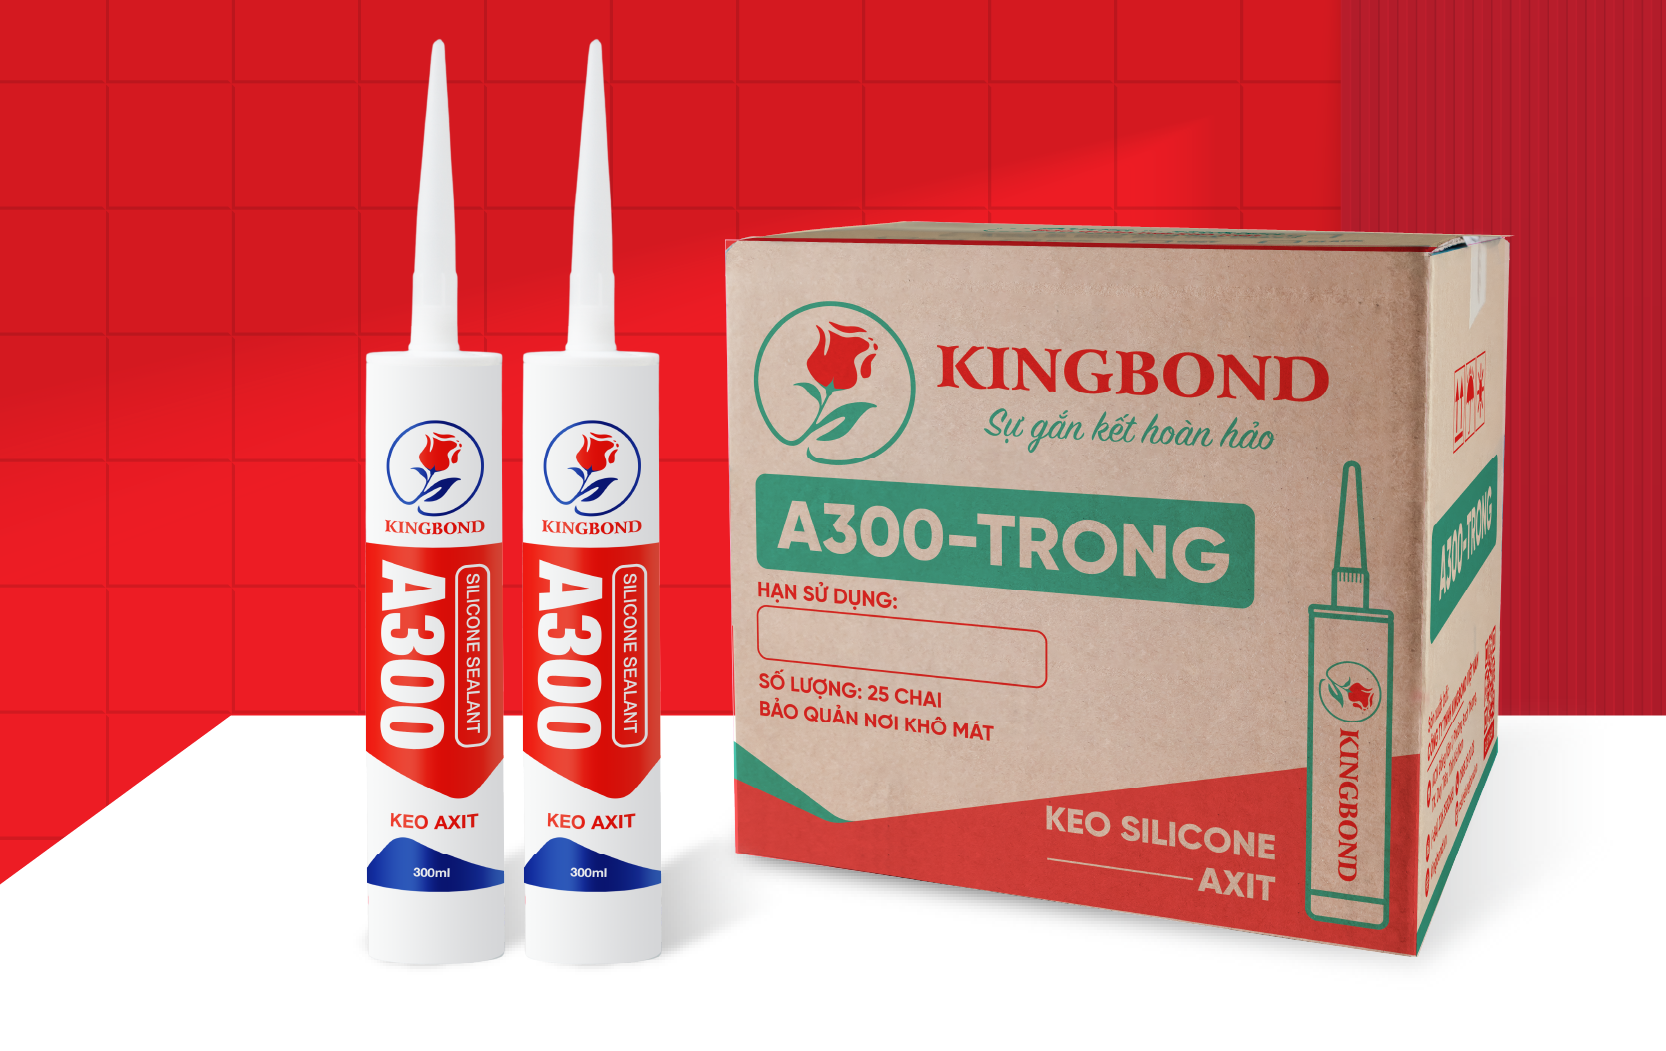 Keo silicone axit A300 trong - Công Ty TNHH Kingbond Việt Nam